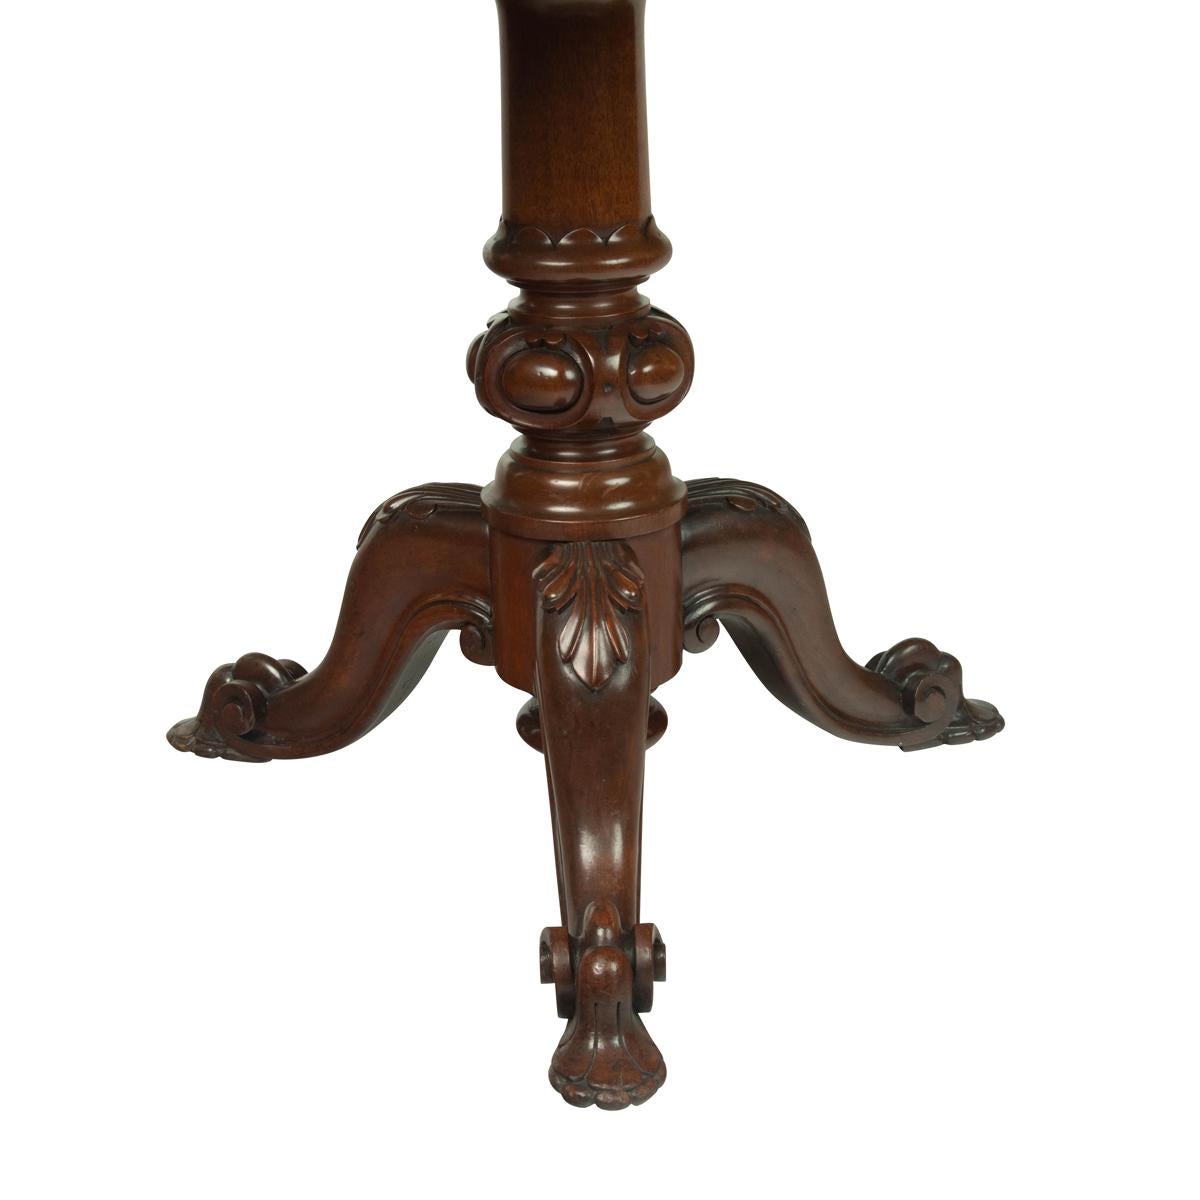 A Victorian mahogany revolving display table, the circular burgundy leather inset top within cross banding, the frieze also cross-banded, the whole raised upon a turned support with three cabriole legs carved with scrolling acanthus and volutes.